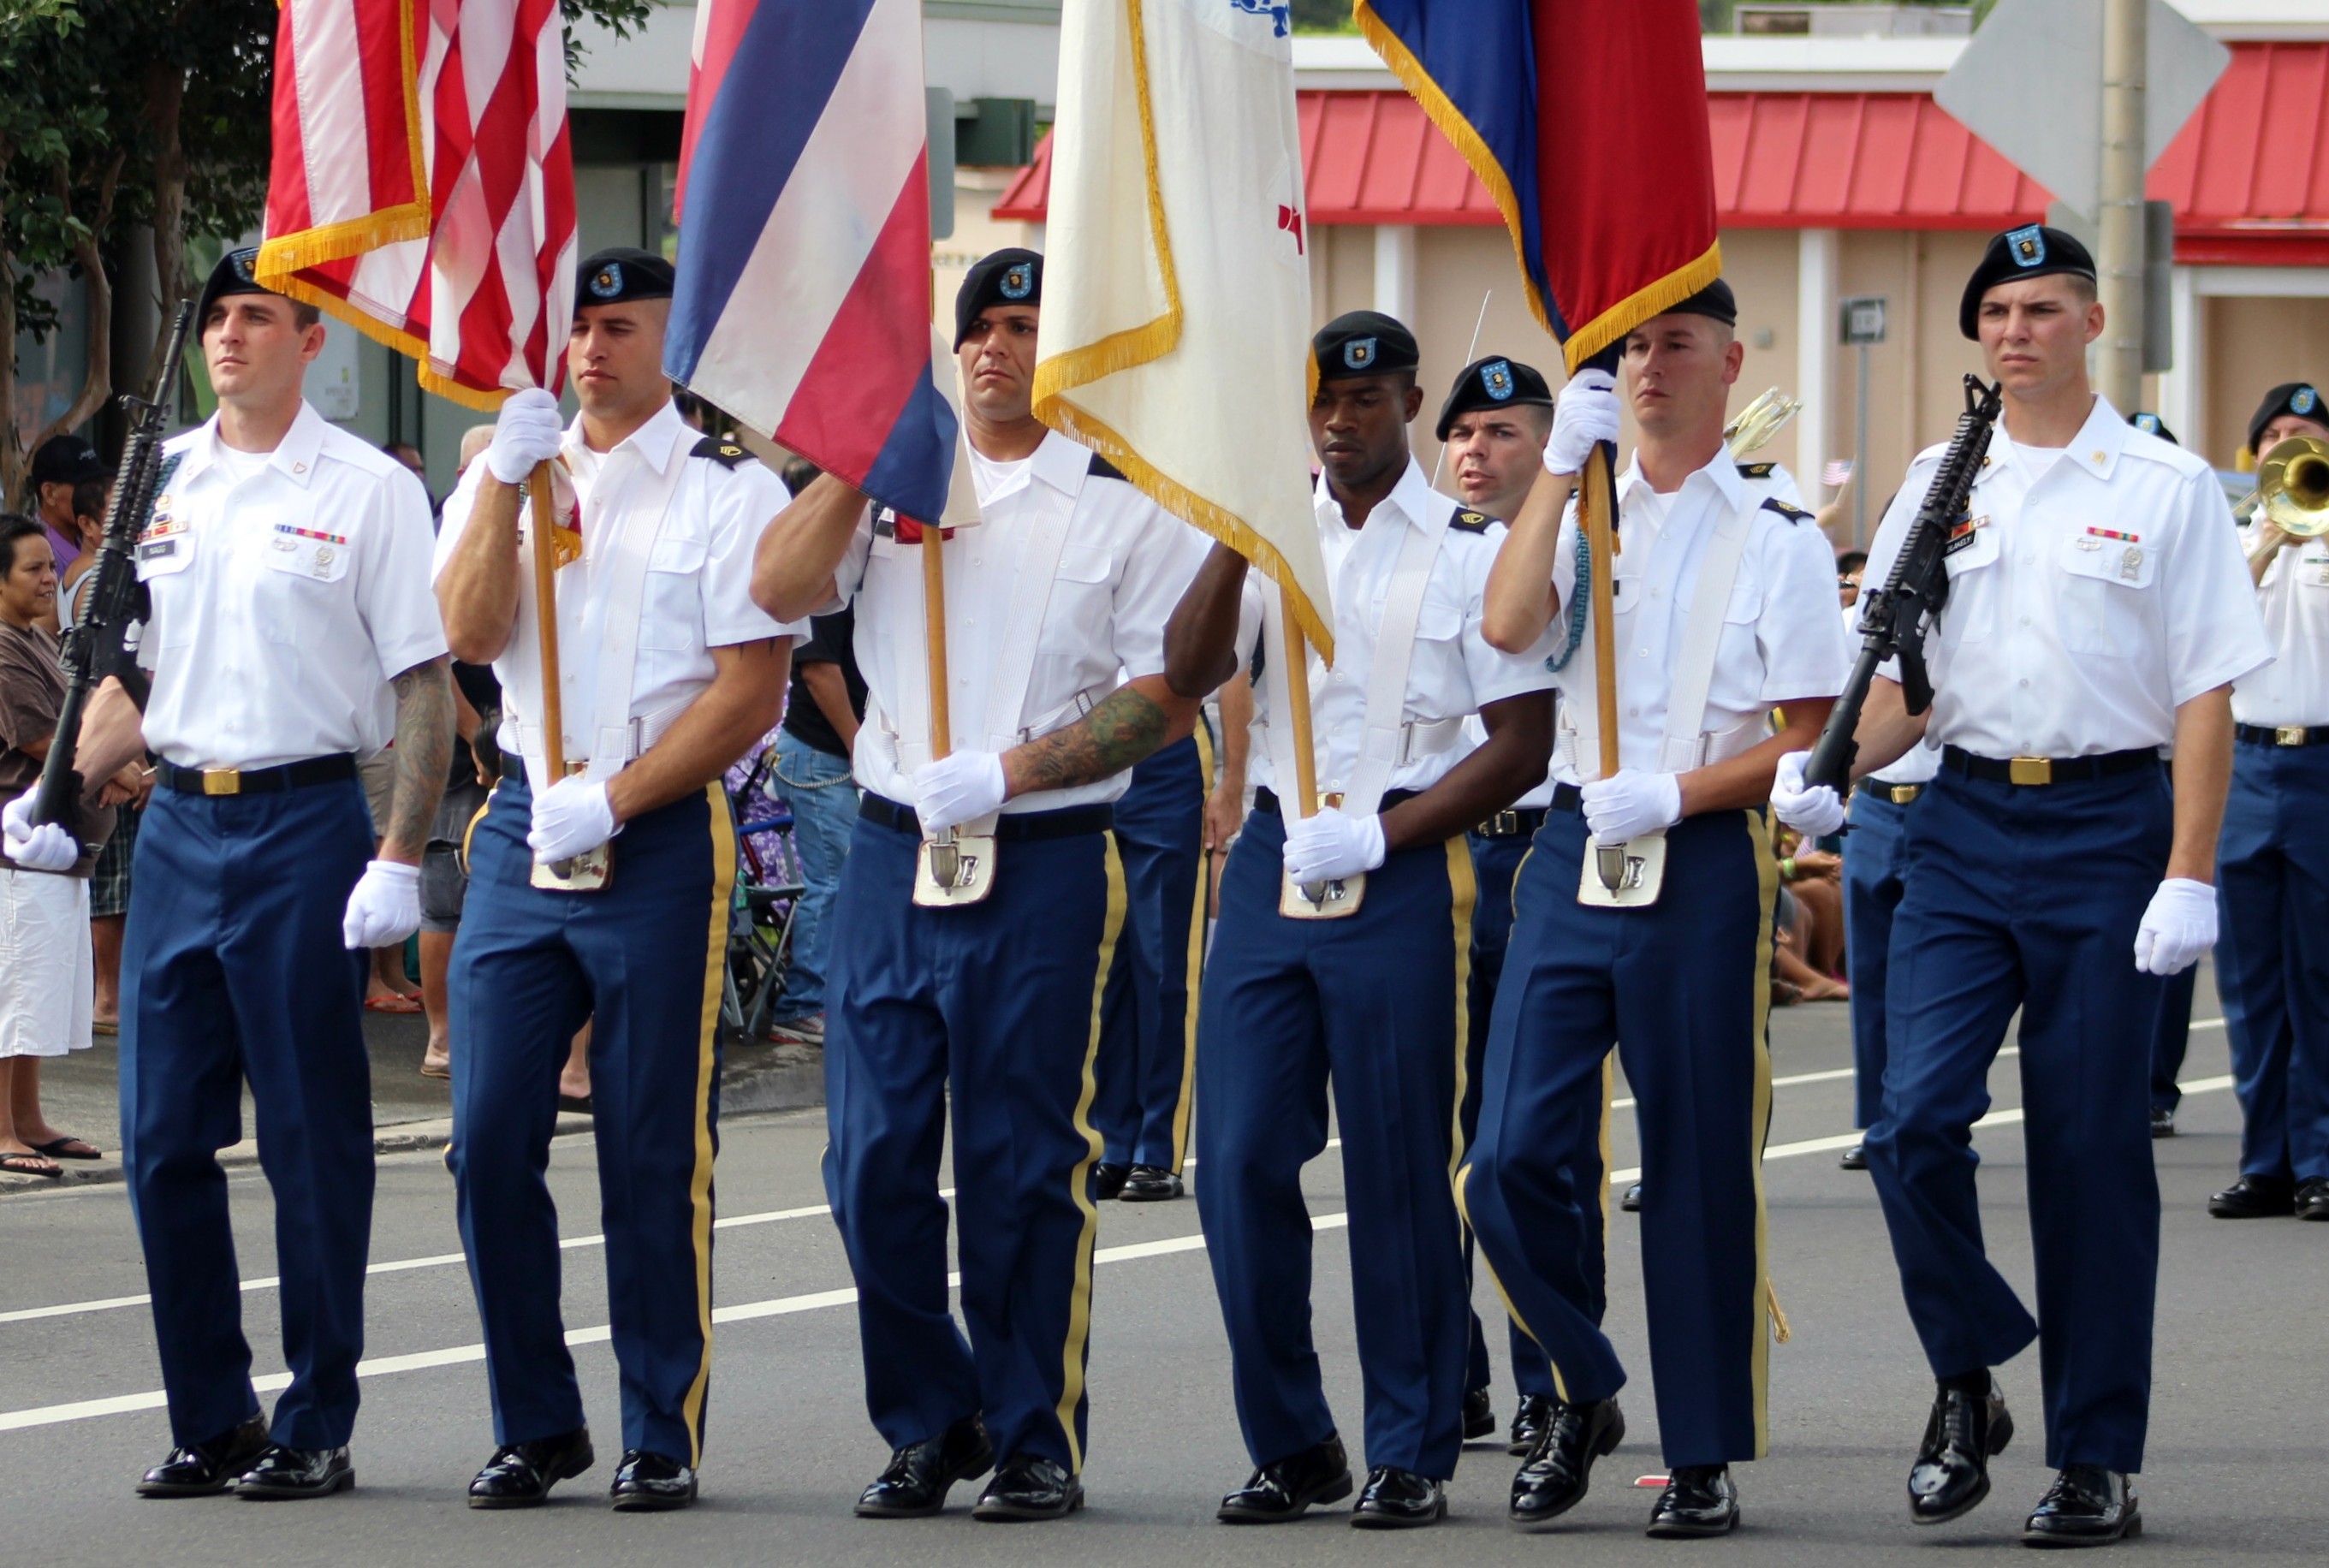 Wahiawa celebrates Veterans during 68th annual parade Article The